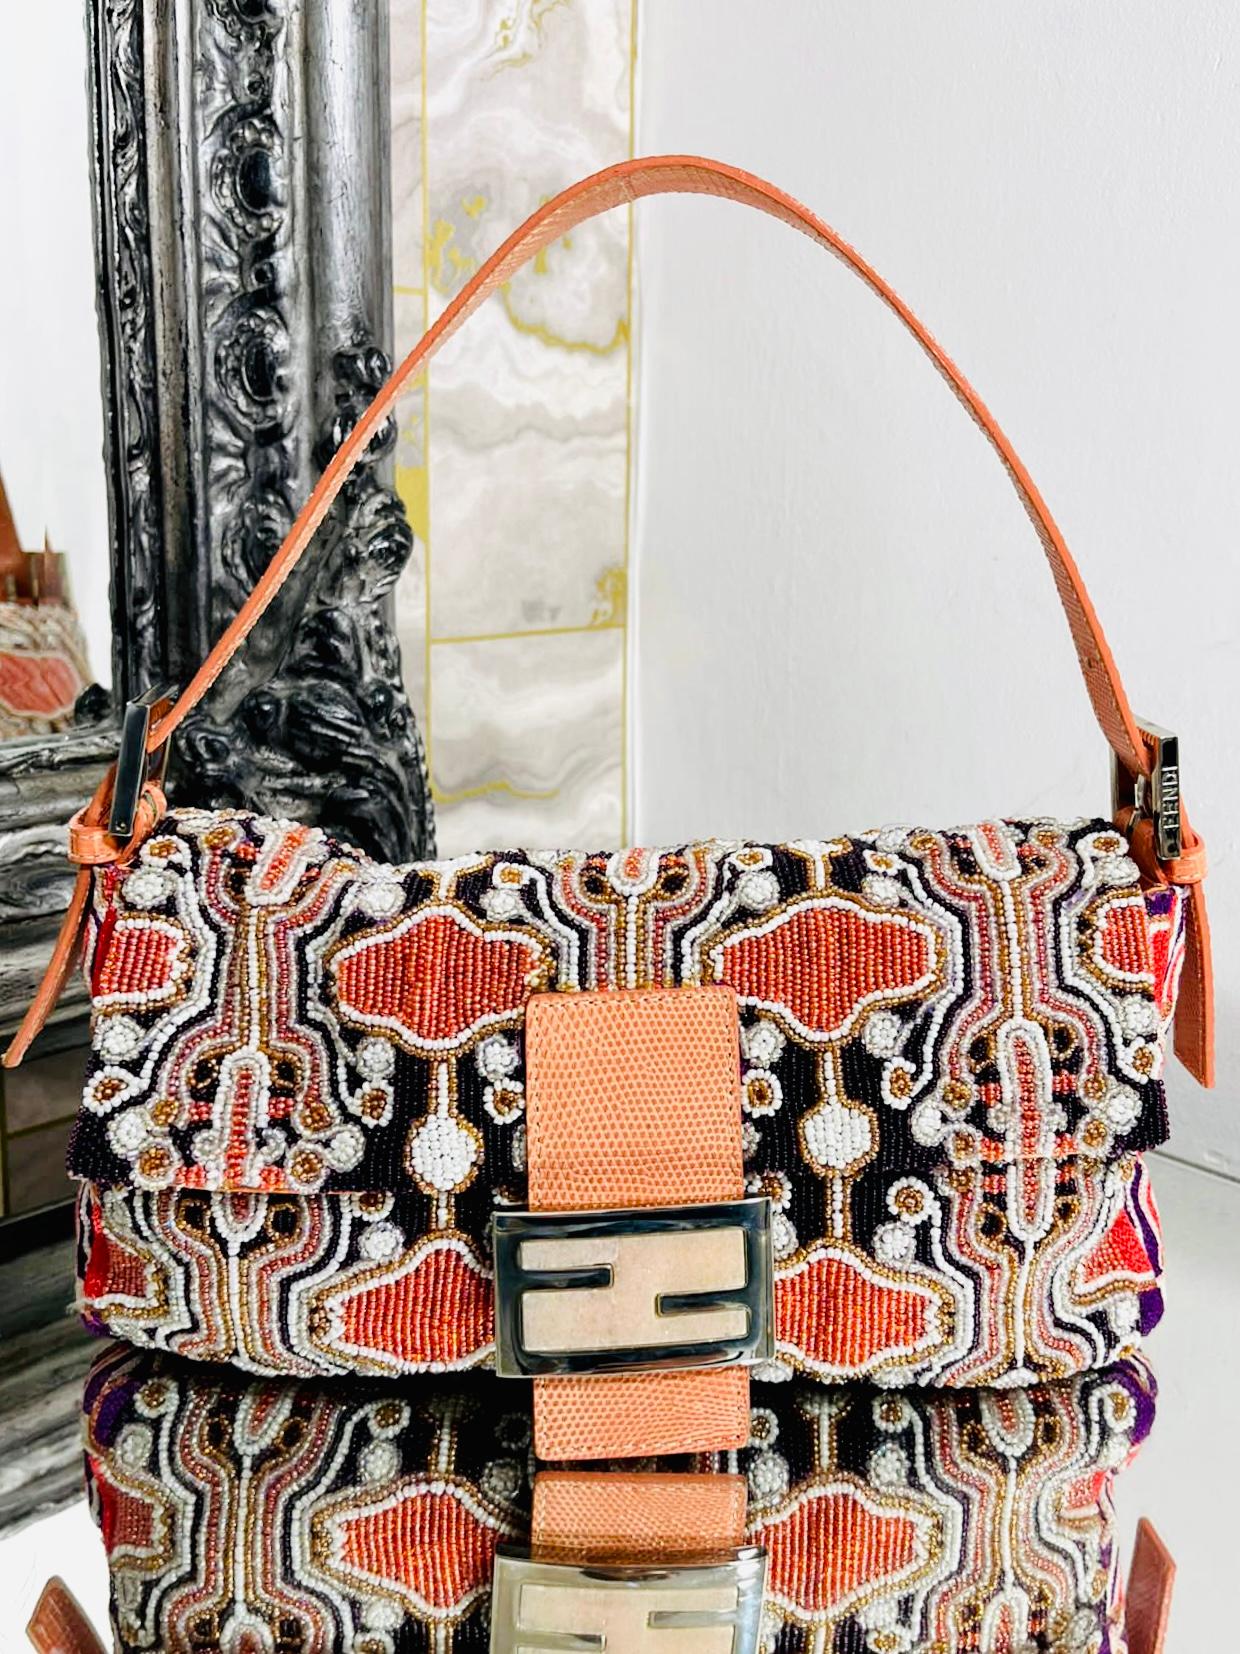 Fendi Beaded & Lizard Skin Baguette Bag

From the 190's  is this rare bag which is fully adorned with orange, black and white  beading. Flap front with magnetic closure and peach toned lizard skink accents and strap. Silver hardware. Vintage. 

Size